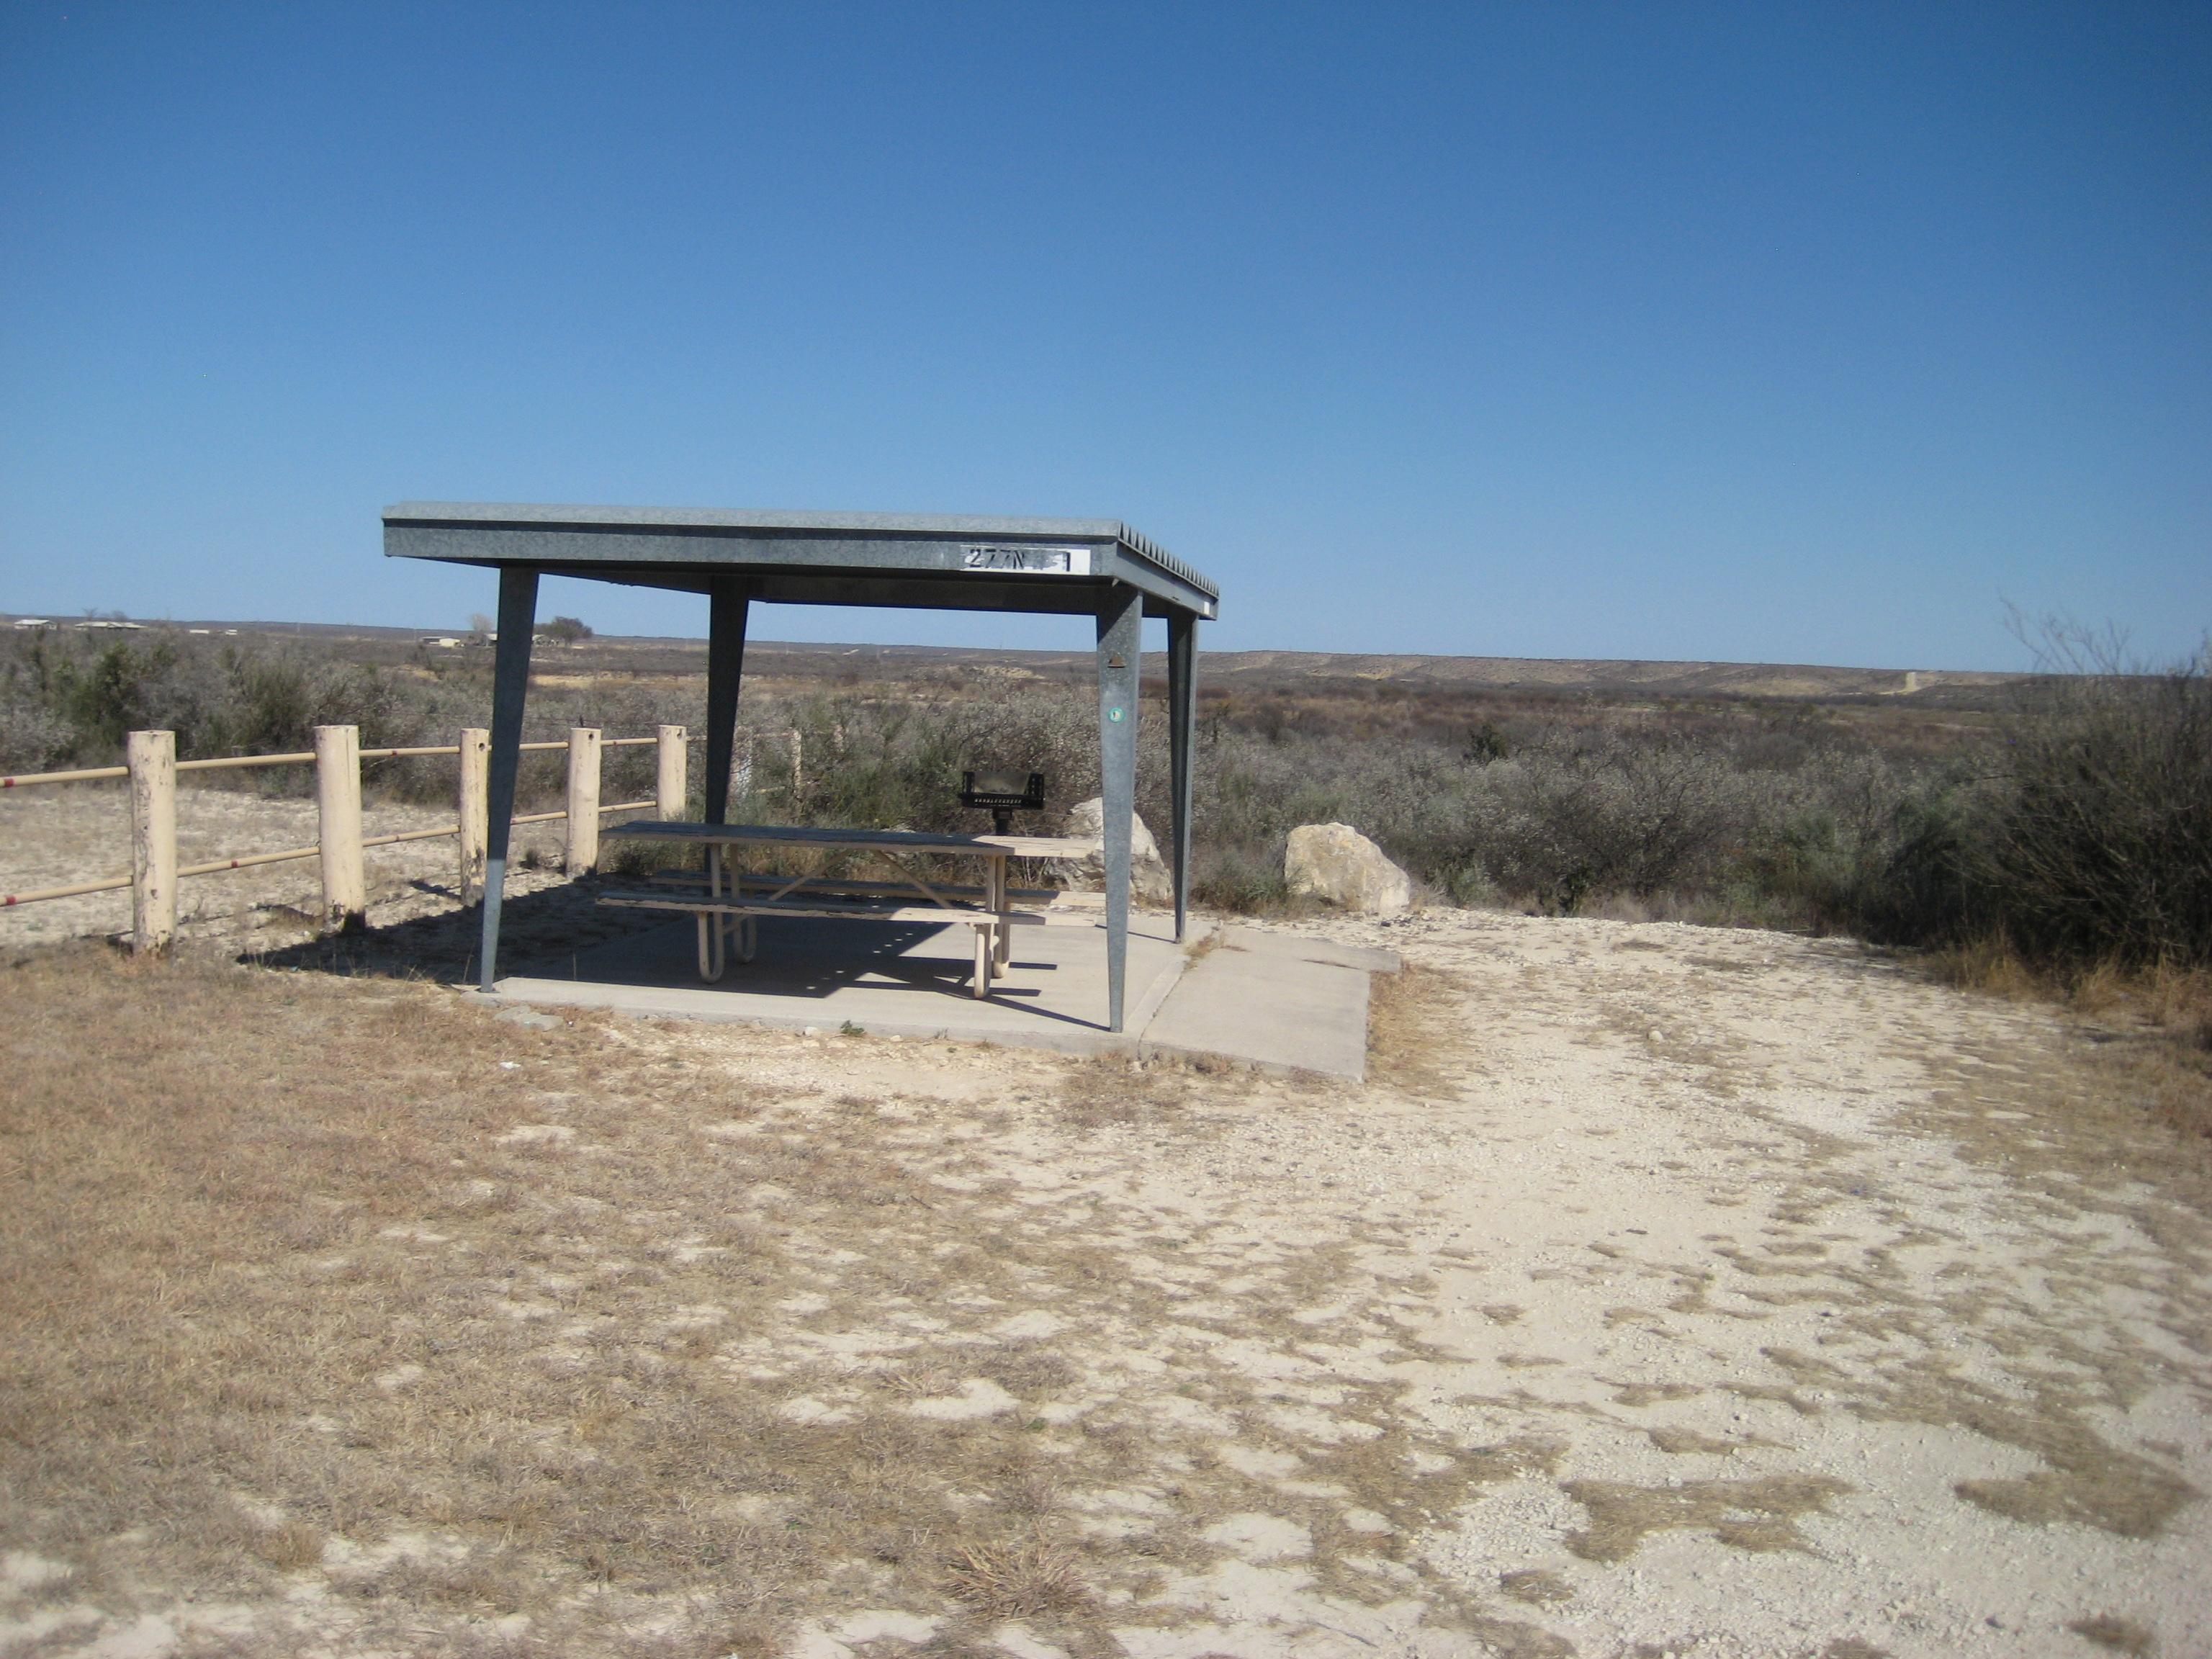 Picnic table under metal shade shelter